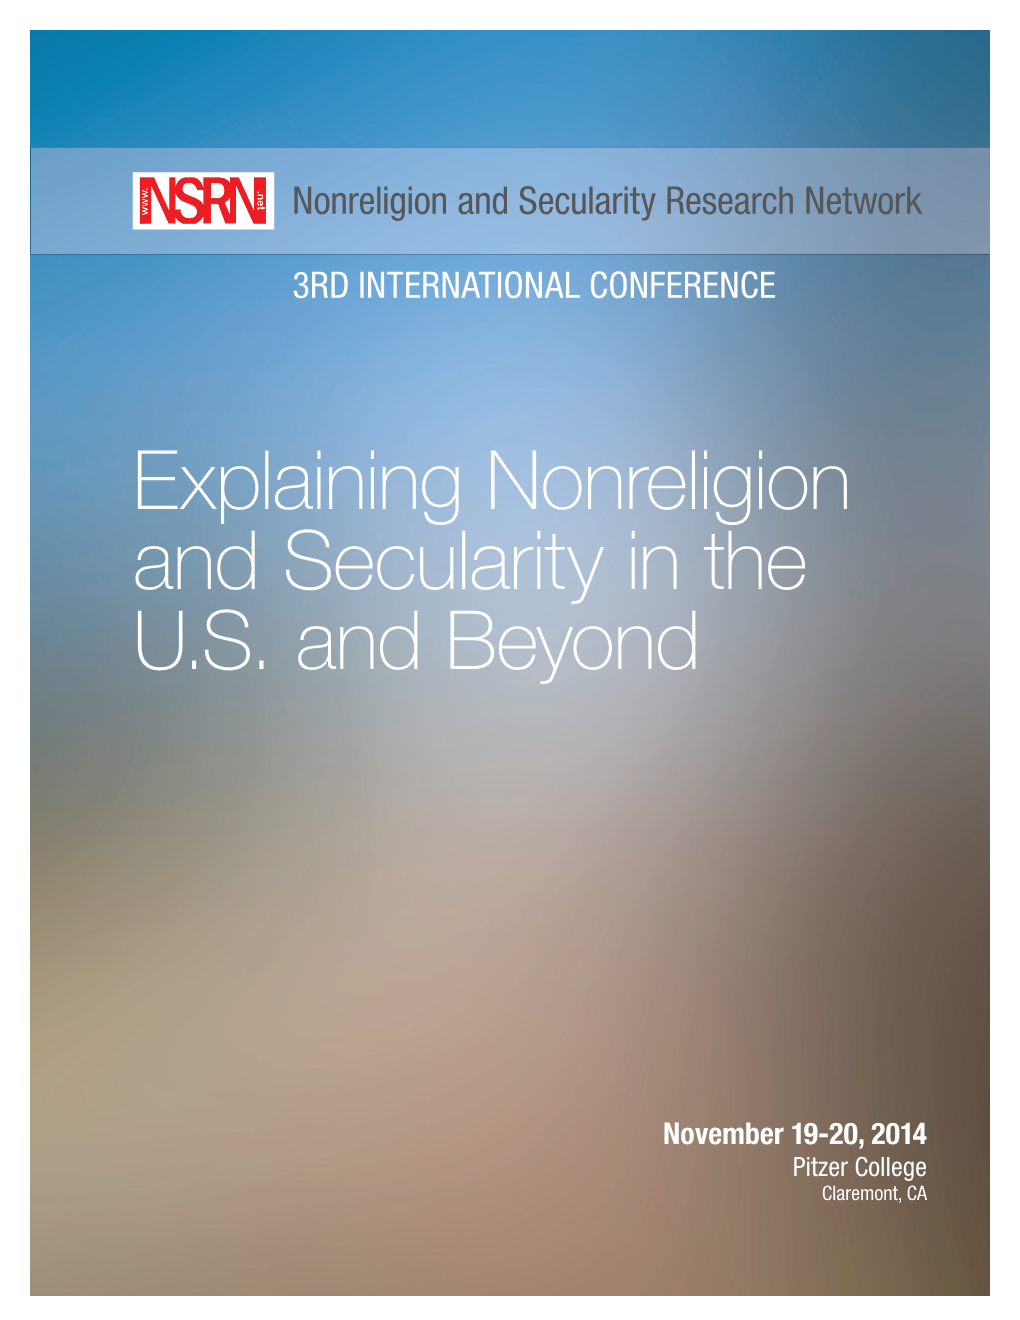 Explaining Nonreligion and Secularity in the U.S. and Beyond